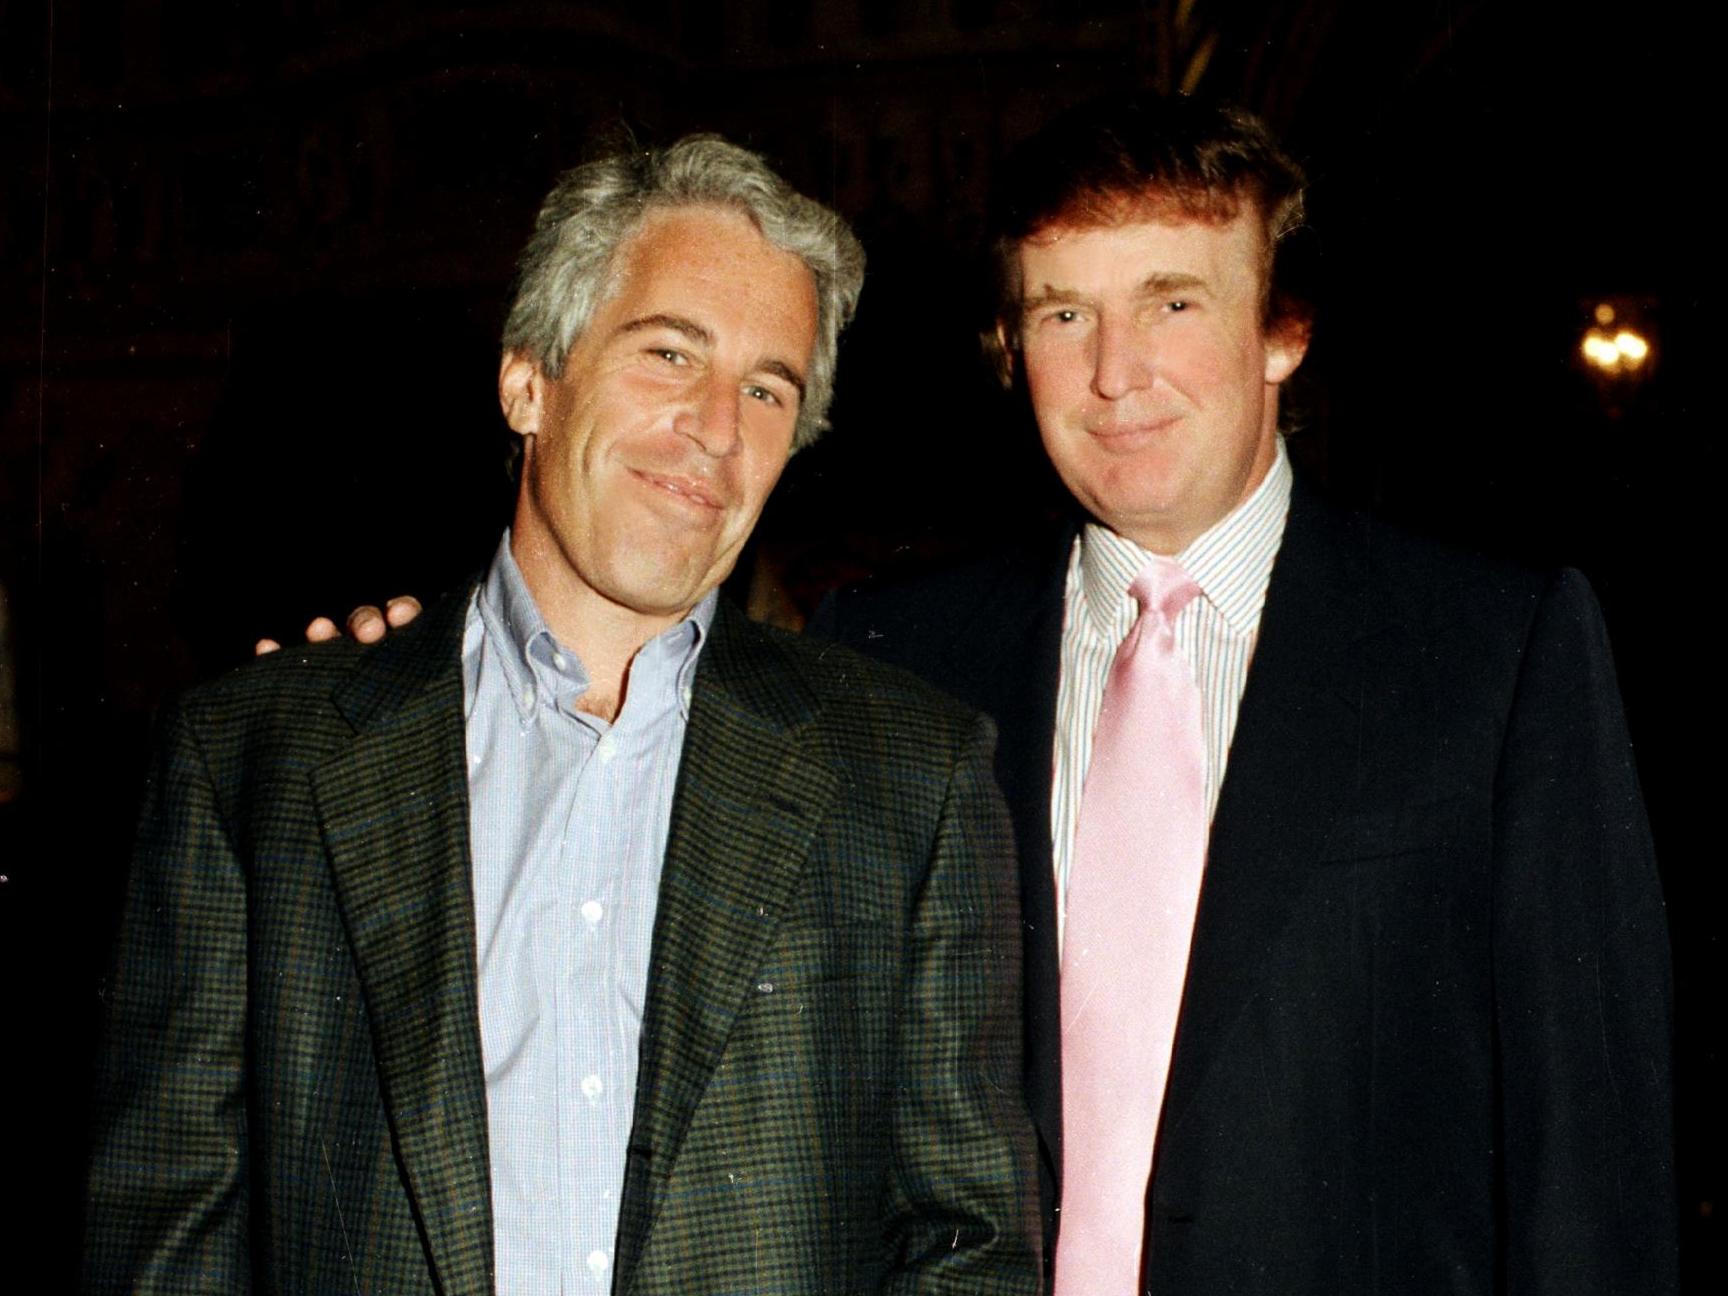 Donald Trump with the late paedophile Jeffrey Epstein